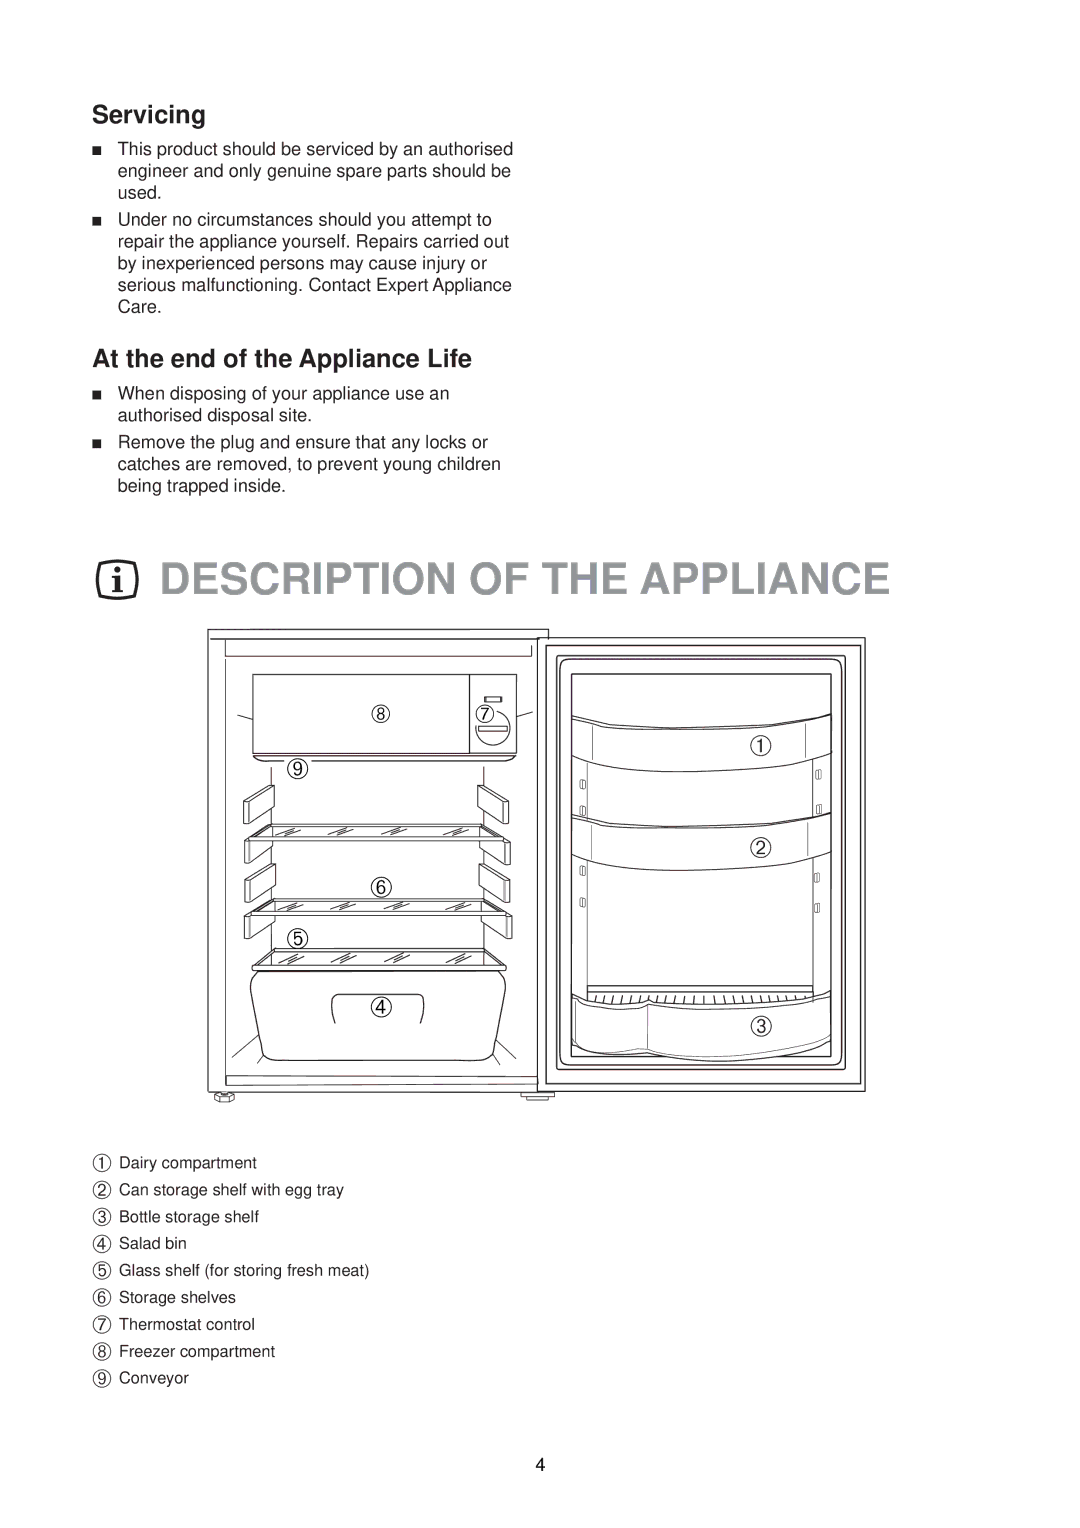 Electrolux ER 1627T manual Description of the Appliance, Servicing, At the end of the Appliance Life 